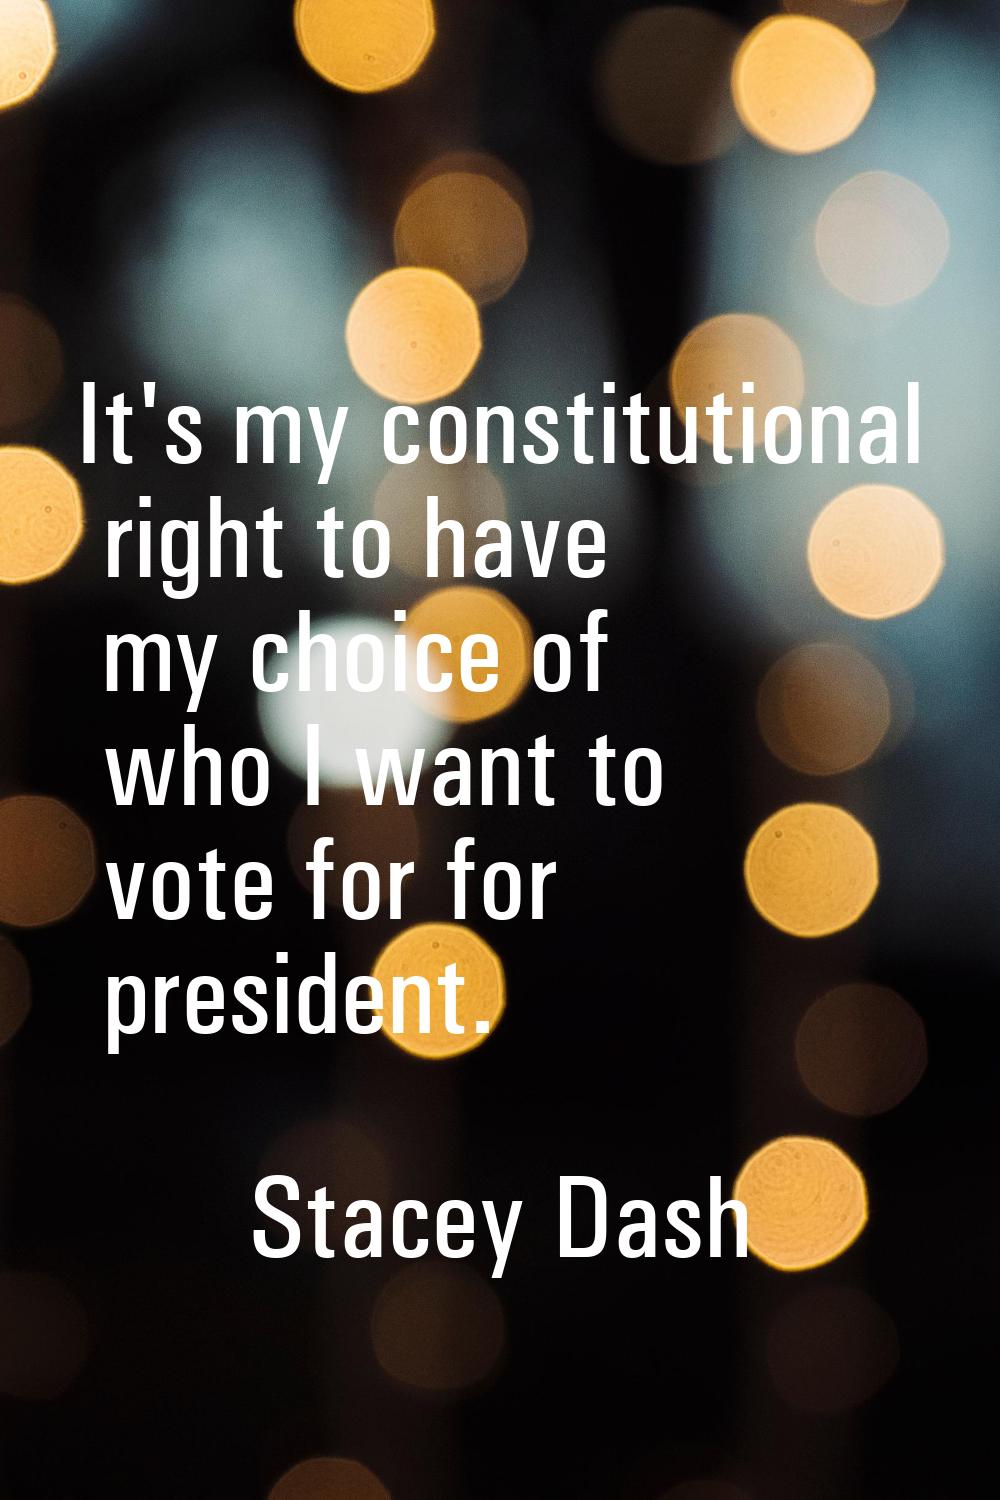 It's my constitutional right to have my choice of who I want to vote for for president.